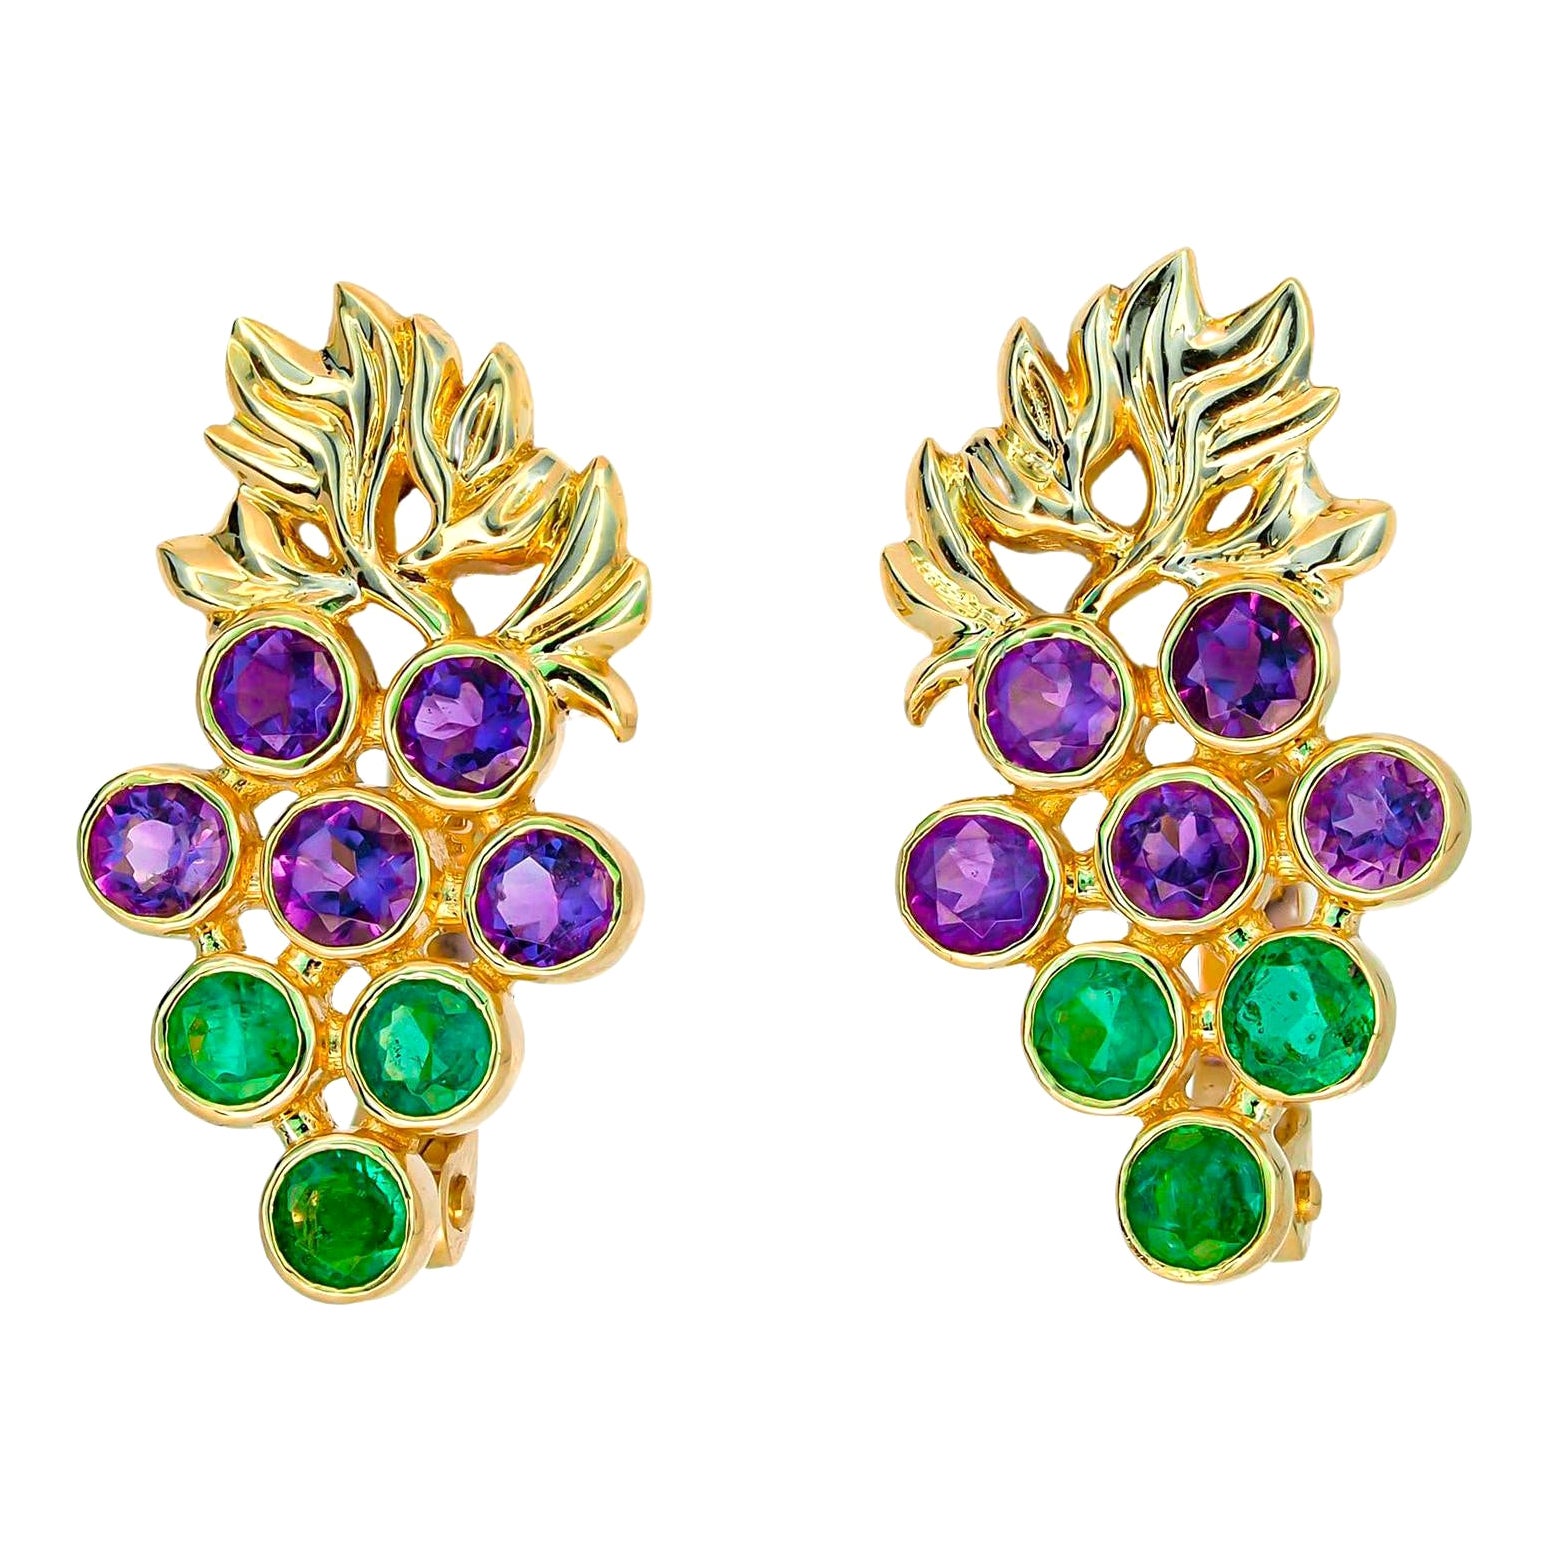 14k Gold Grape Earrings with Emeralds and Amethysts For Sale